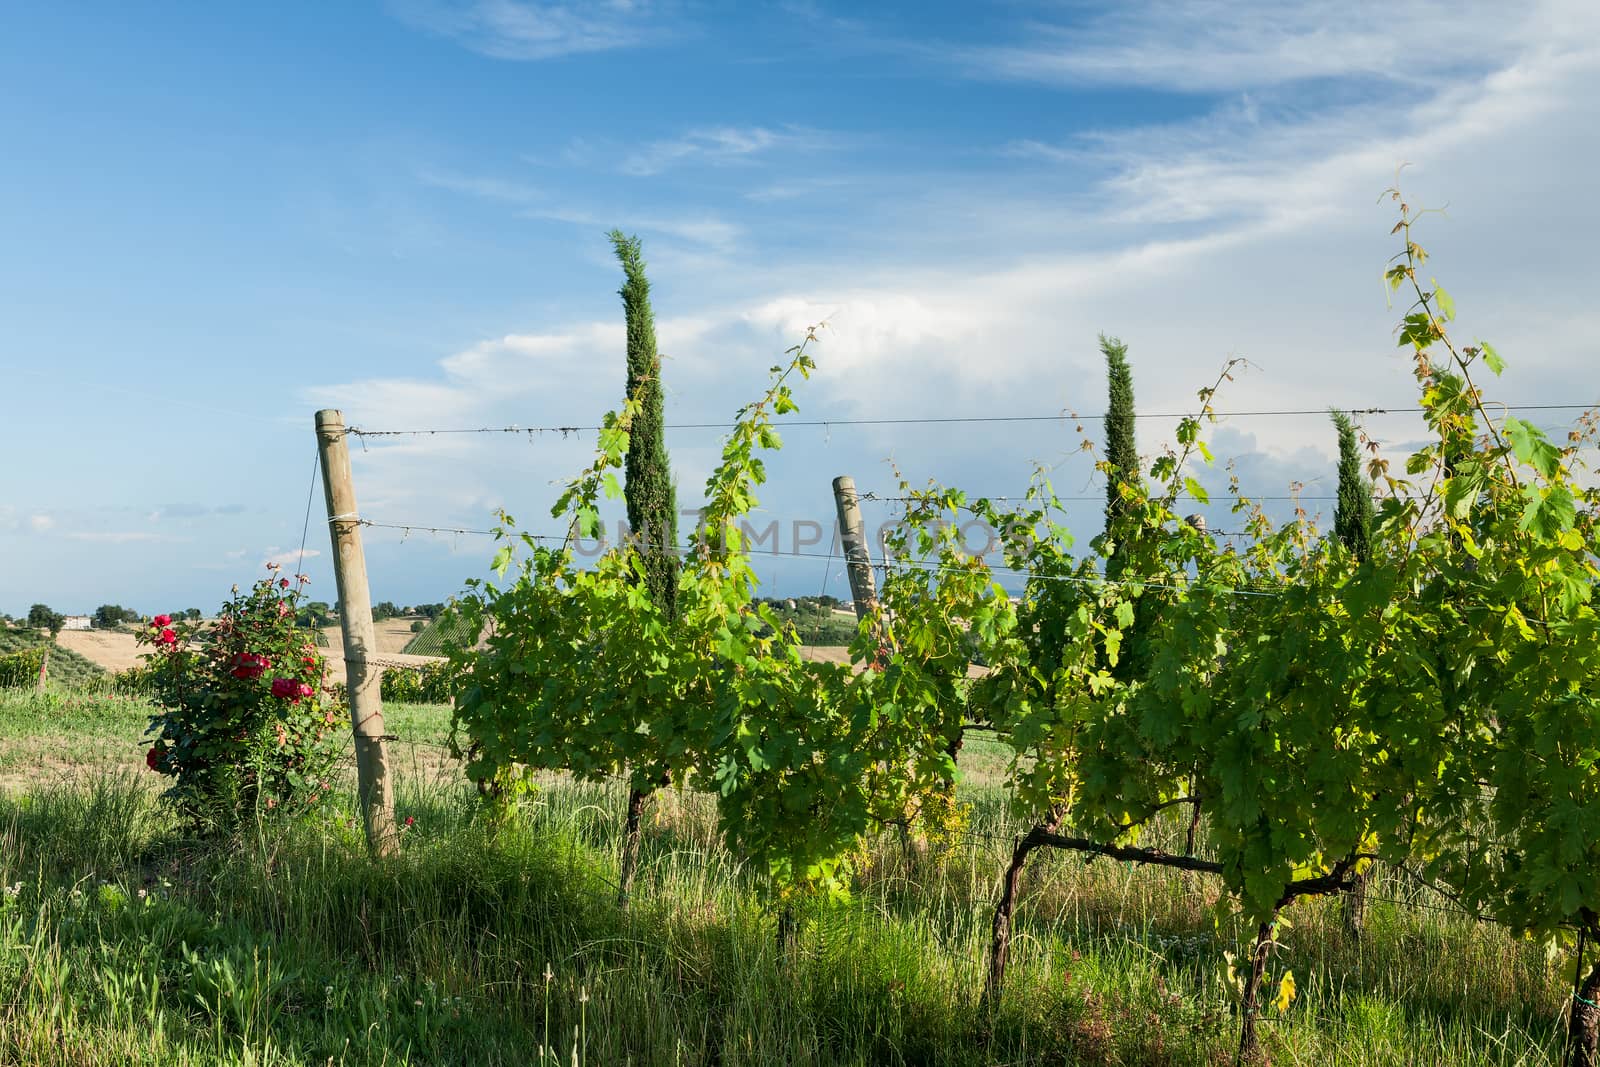 Grapevines in the vineyard against a blue sky